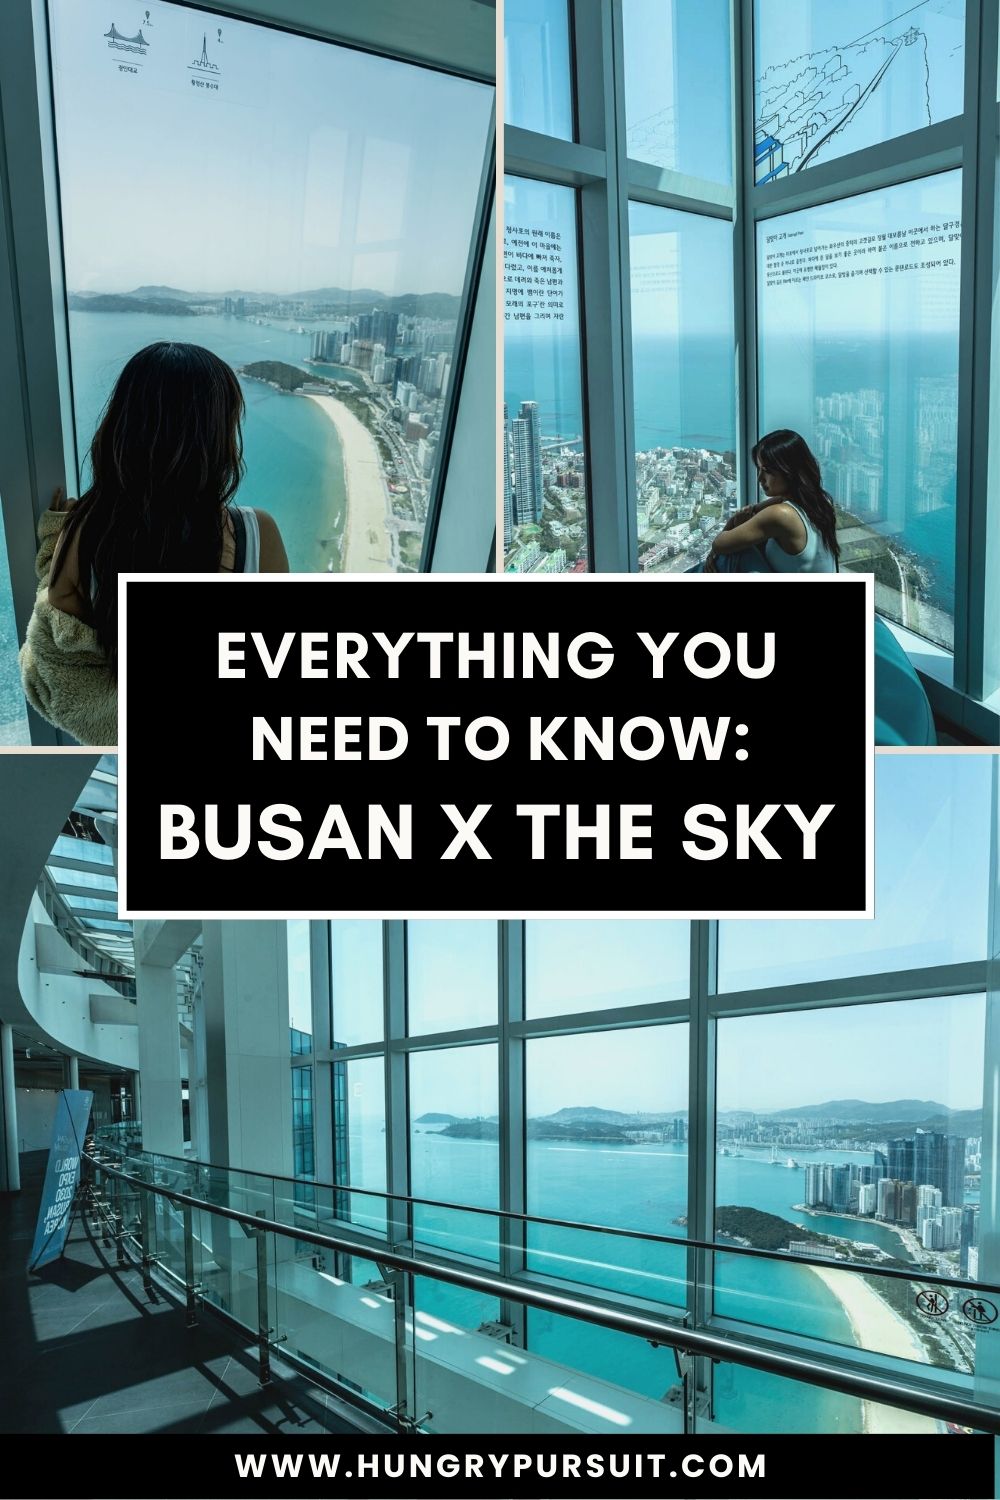 Guide of everything you need to know before going to Busan X The Sky, get photos of Hundae beach from the observatory